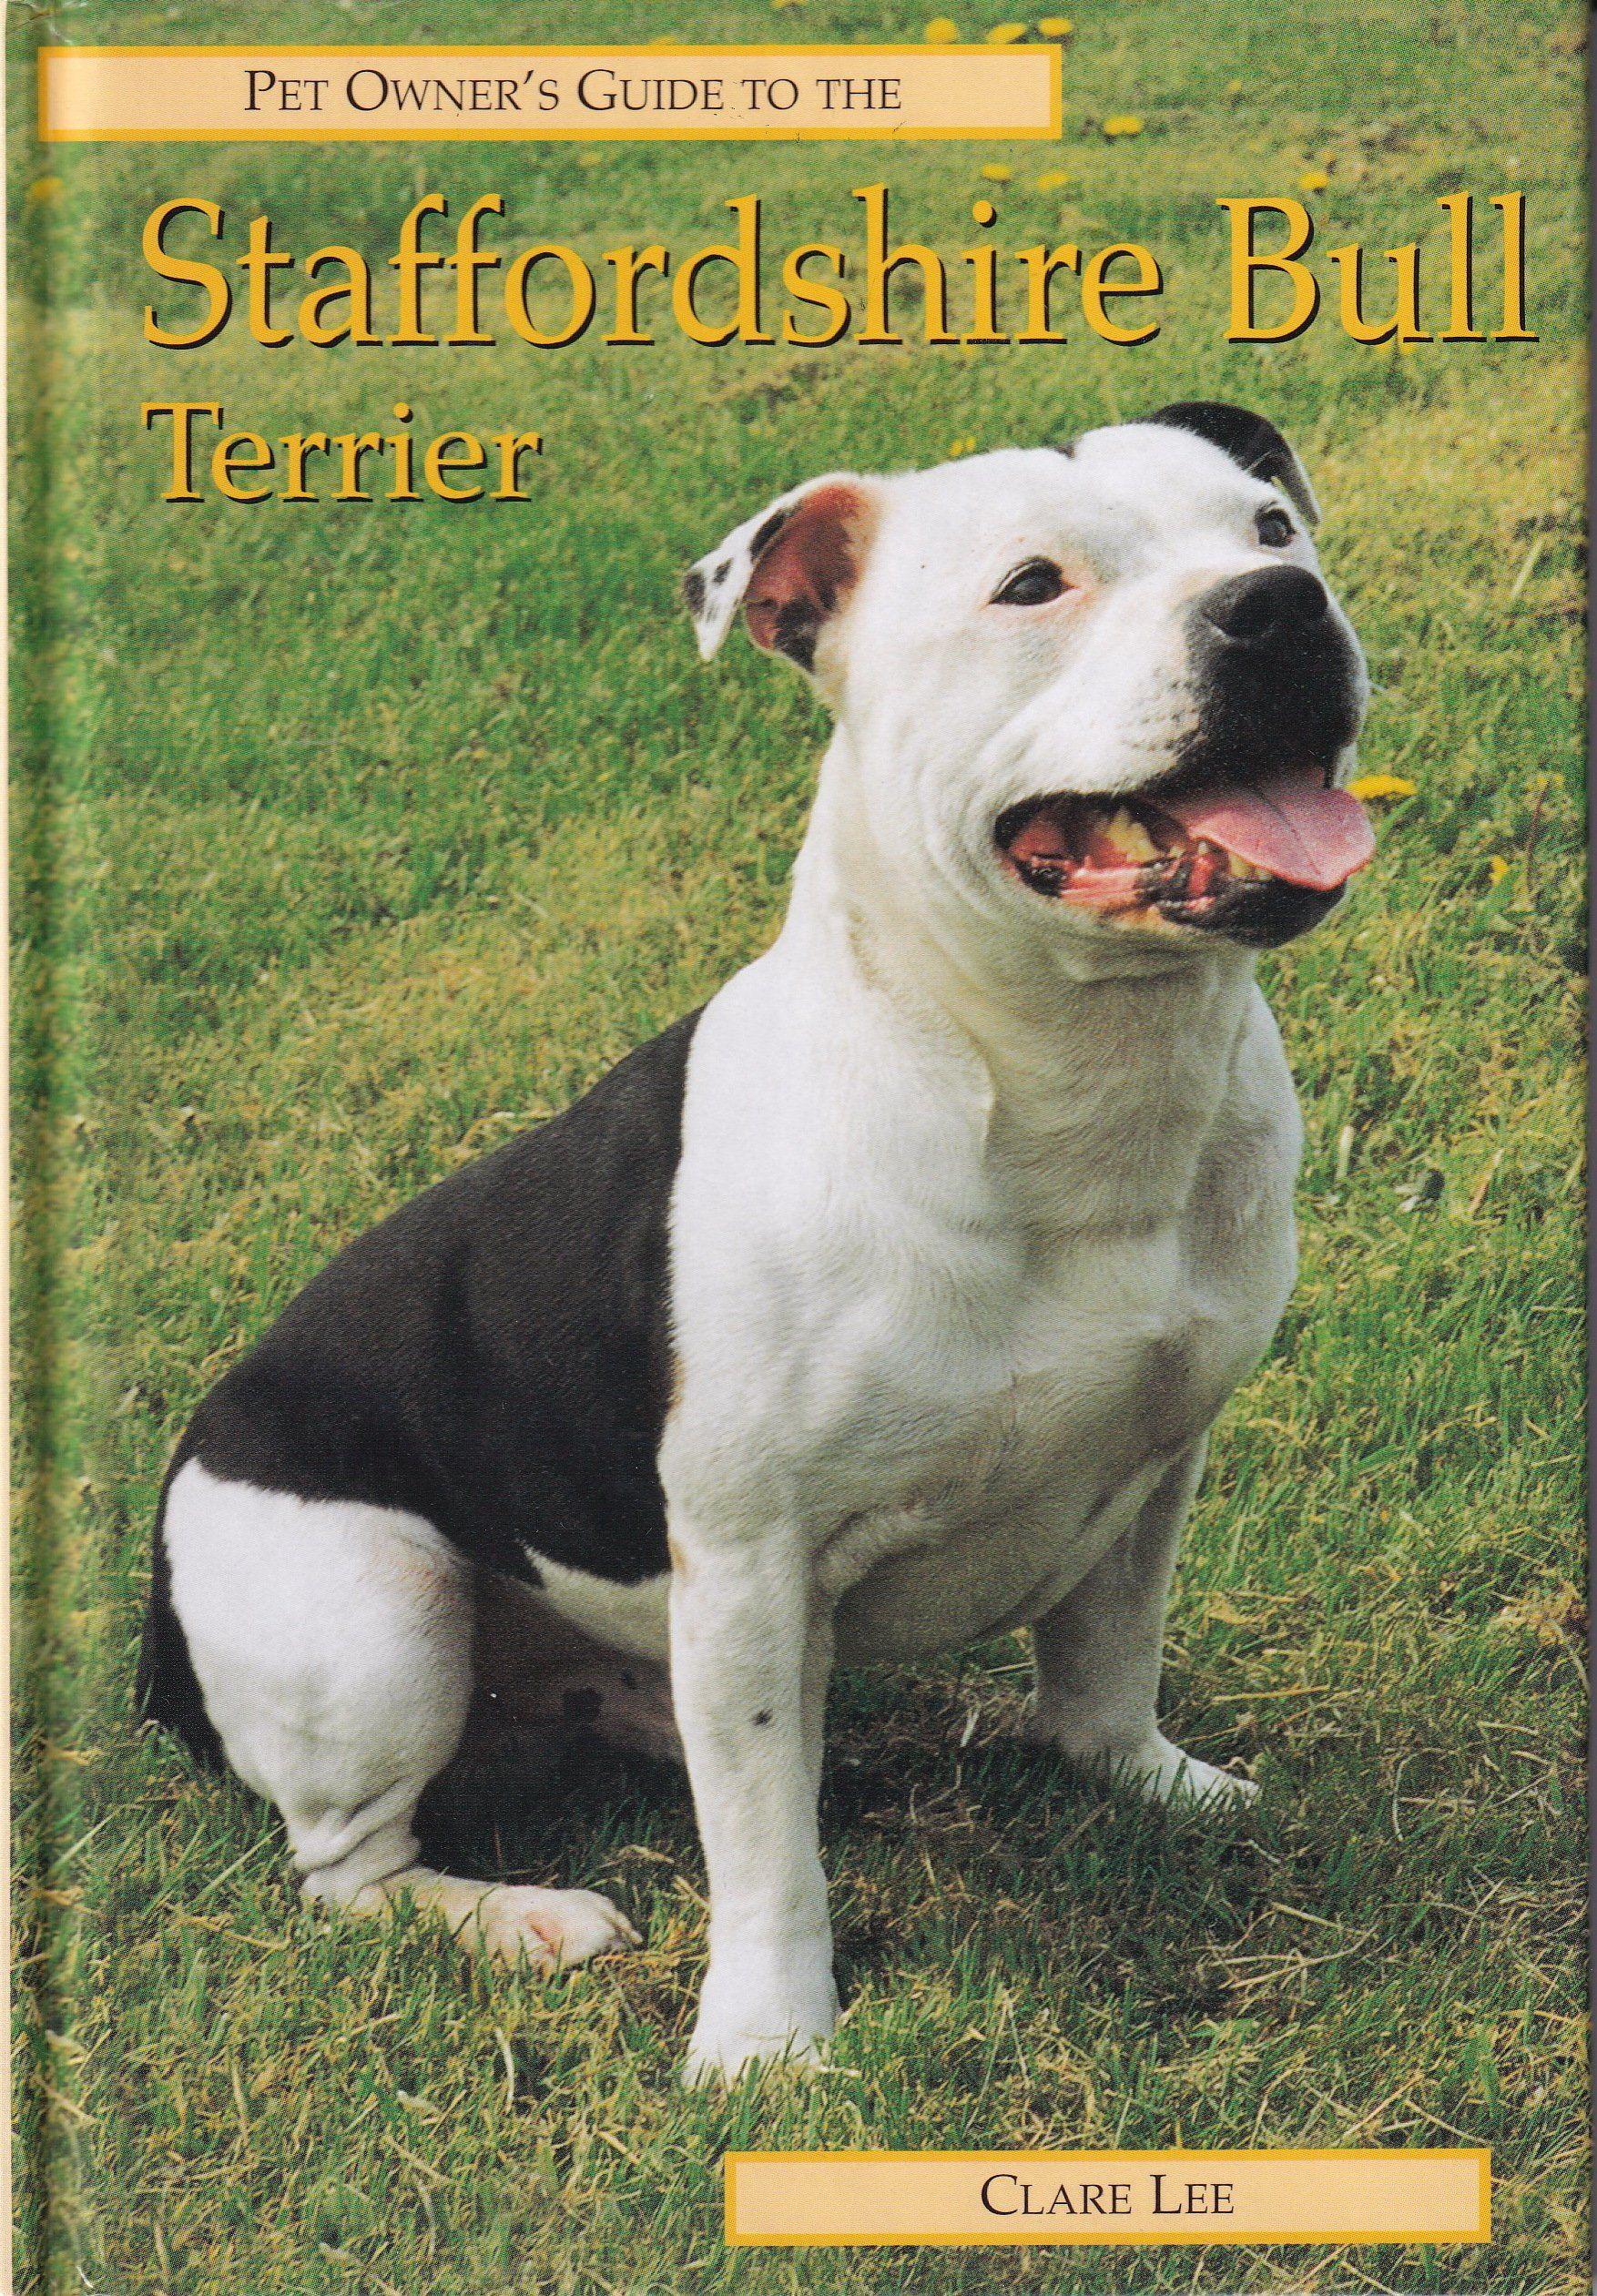 Pet Owner's Guide to the Staffordshire Bull Terrier by Clare Lee